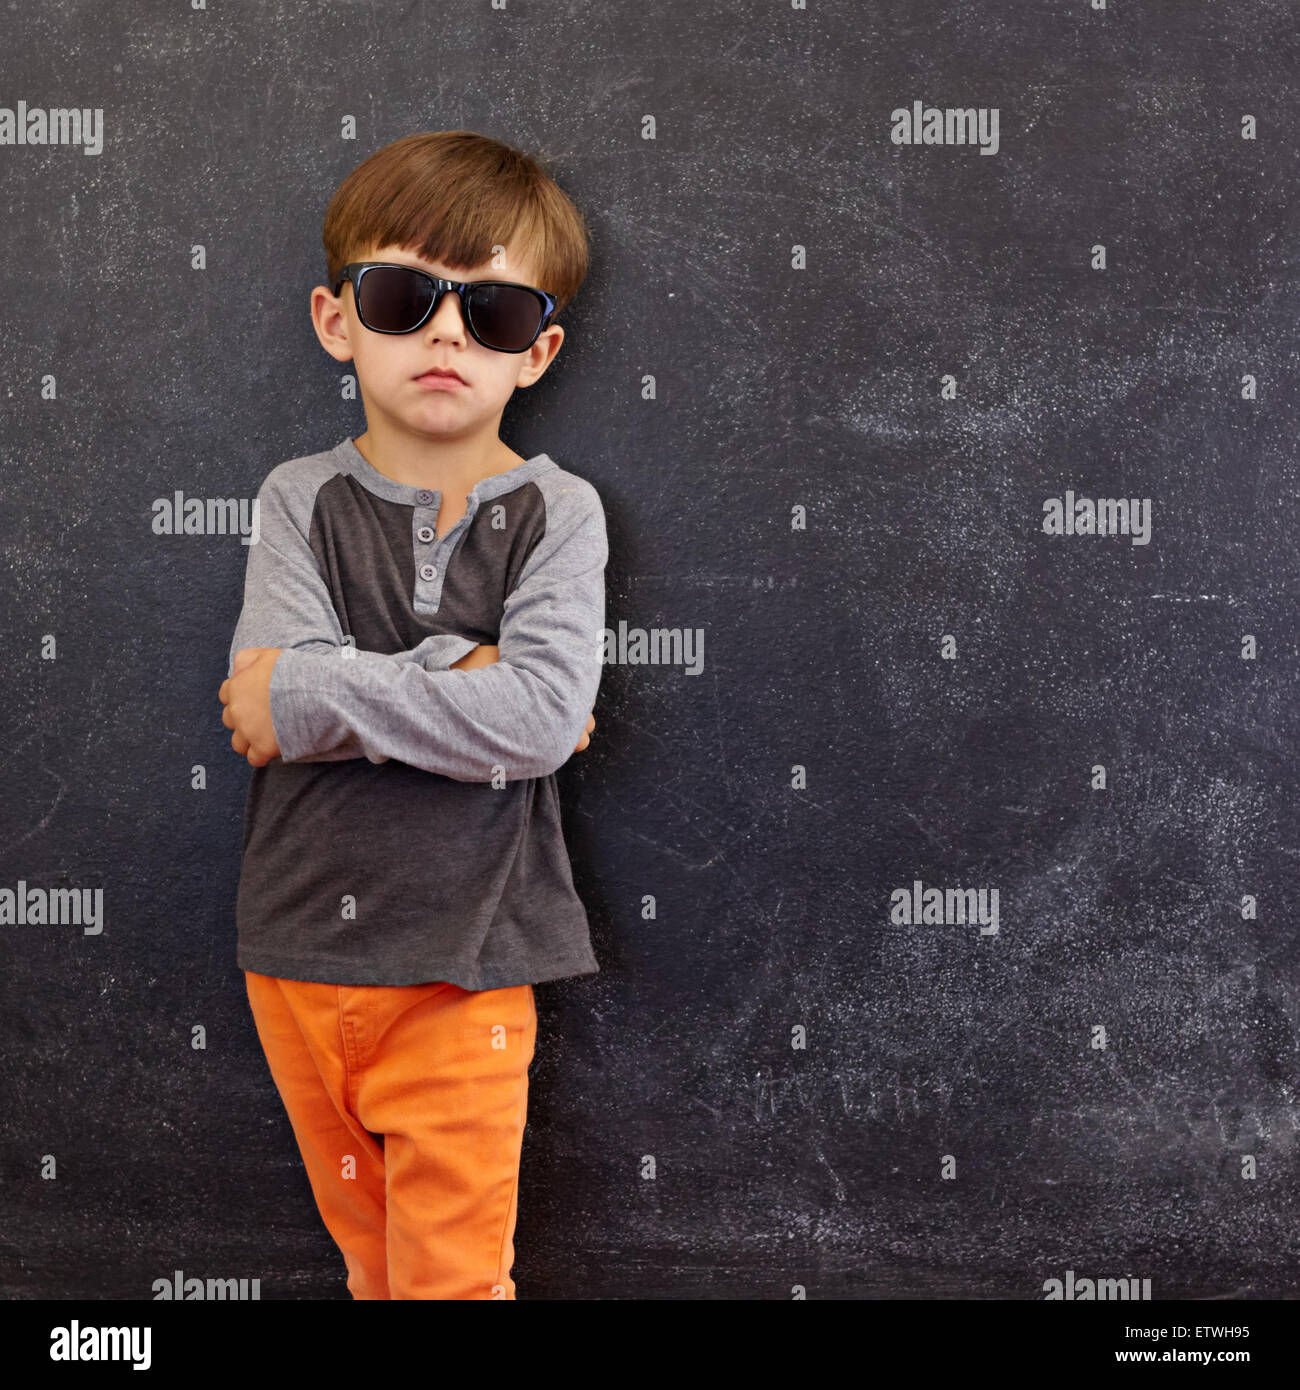 Portrait of smart little boy wearing sunglasses standing with his hands folded against blackboard with copyspace. Stock Photo